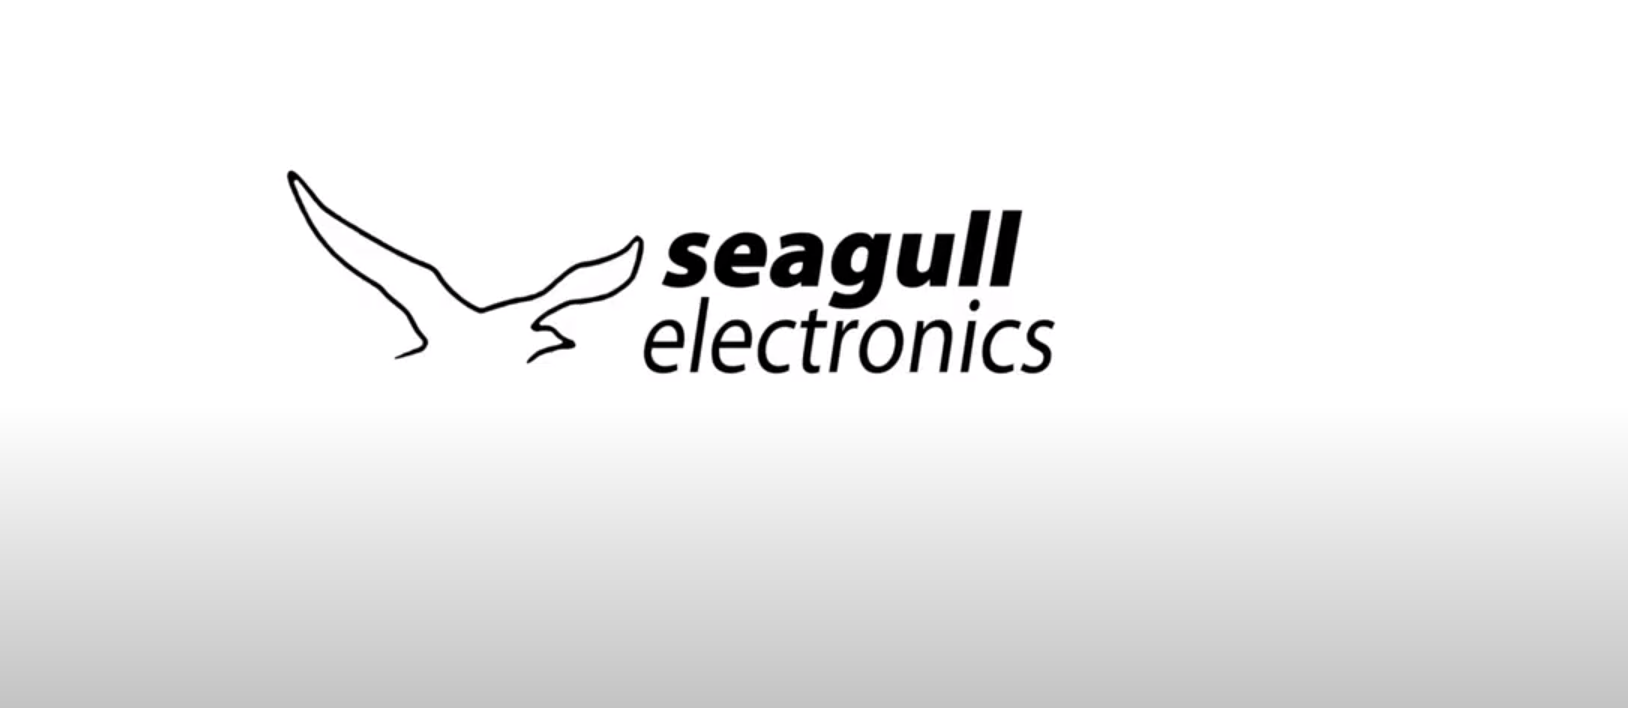 Quality TV installation, mounting, and Audio Installation services with Seagull Electronics